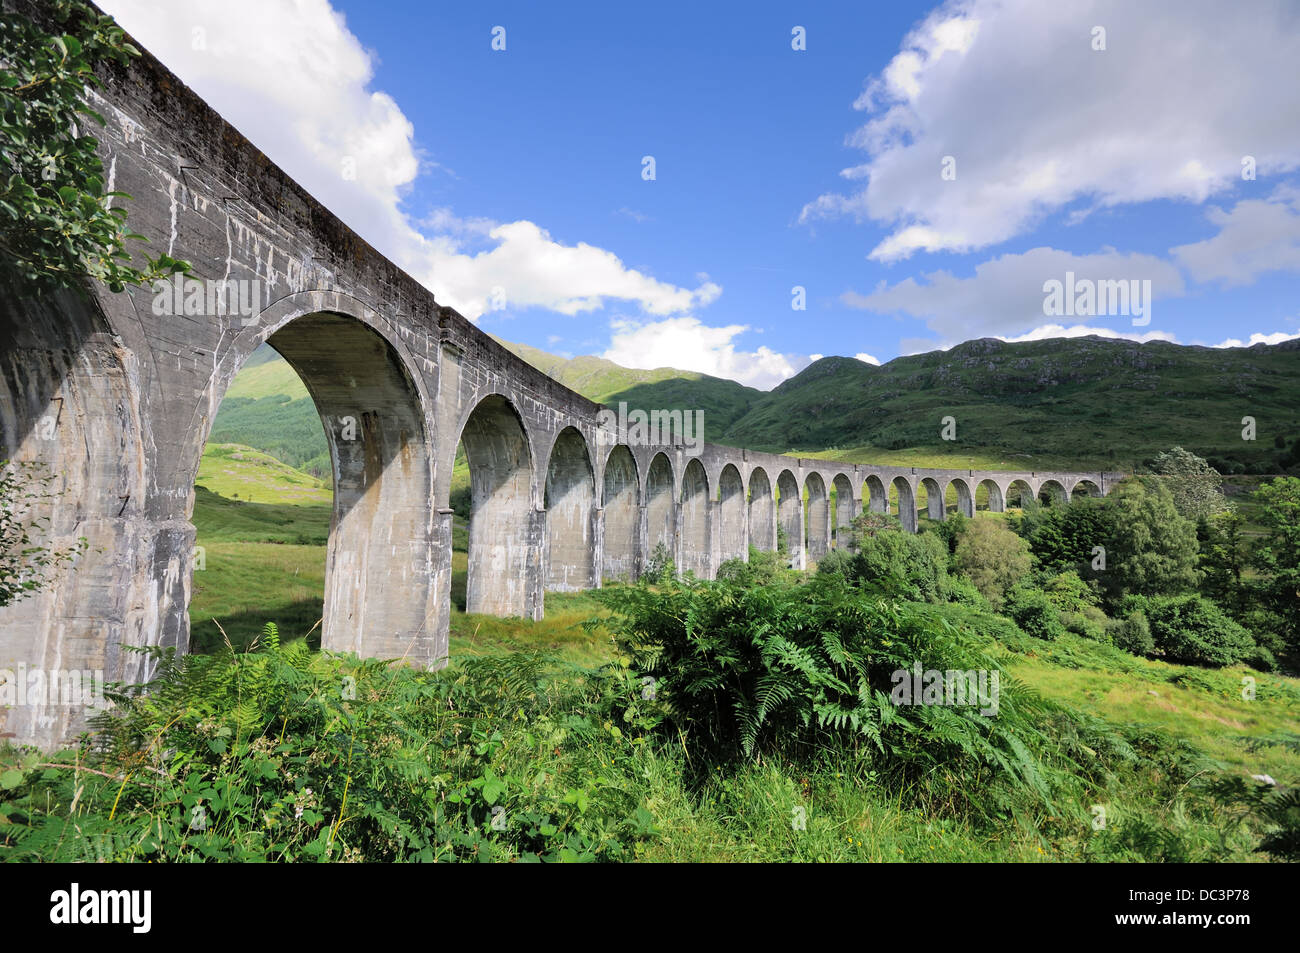 The Glenfinnan viaduct in the West Highlands, Inverness-shire, Scotland, UK Stock Photo